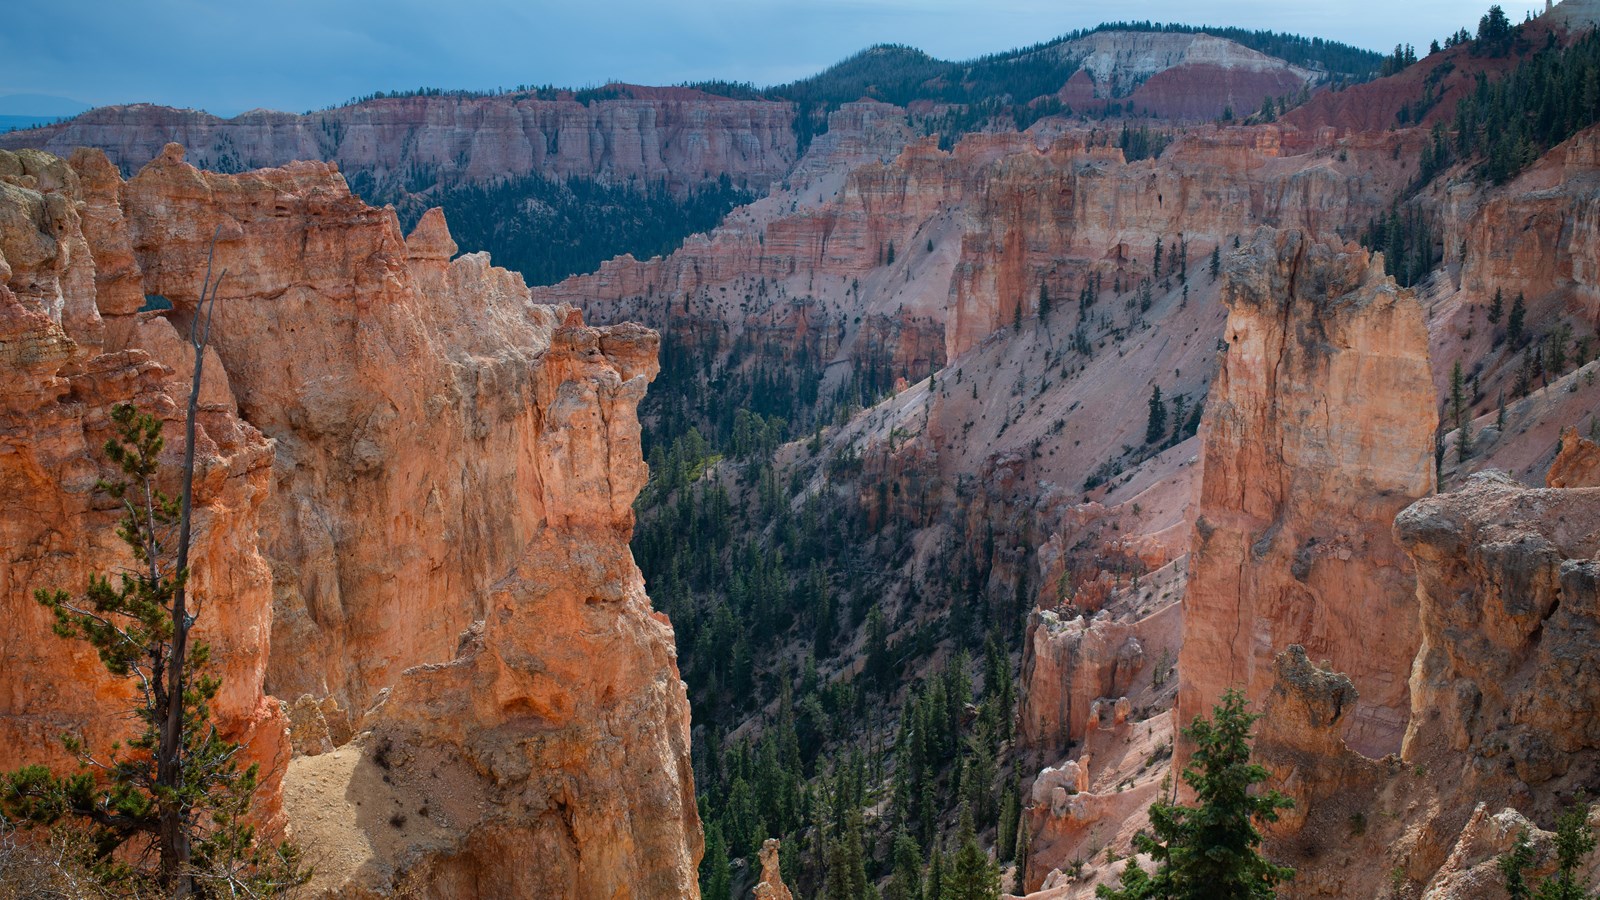 Glowing limestone cliffs tower above a forested canyon